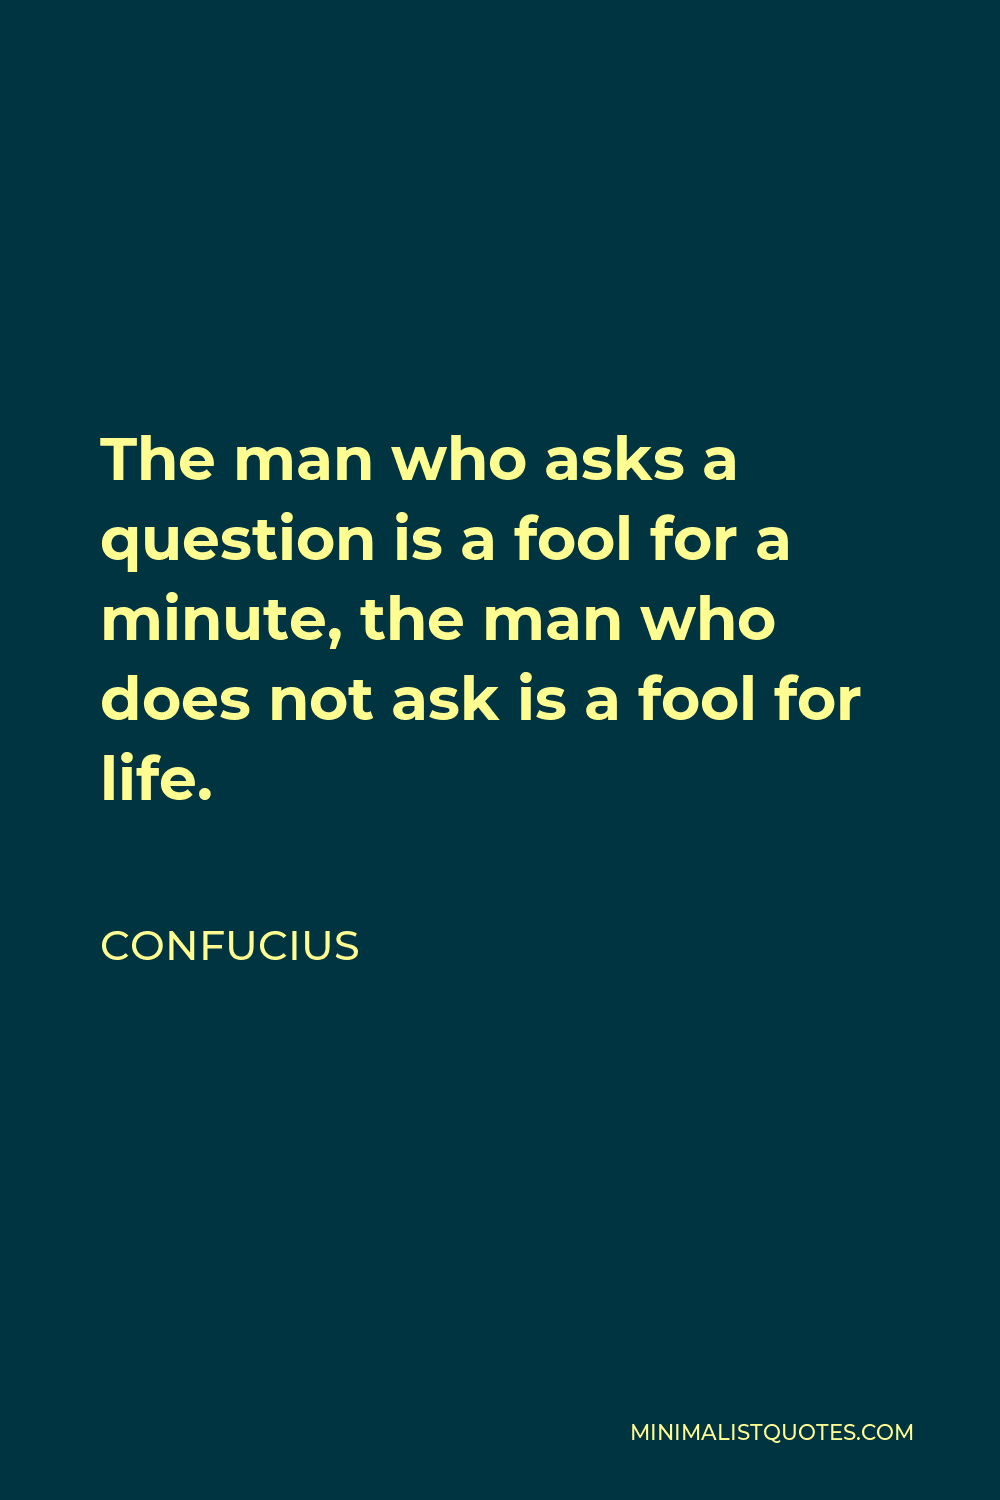 Confucius Quote - The man who asks a question is a fool for a minute, the man who does not ask is a fool for life.